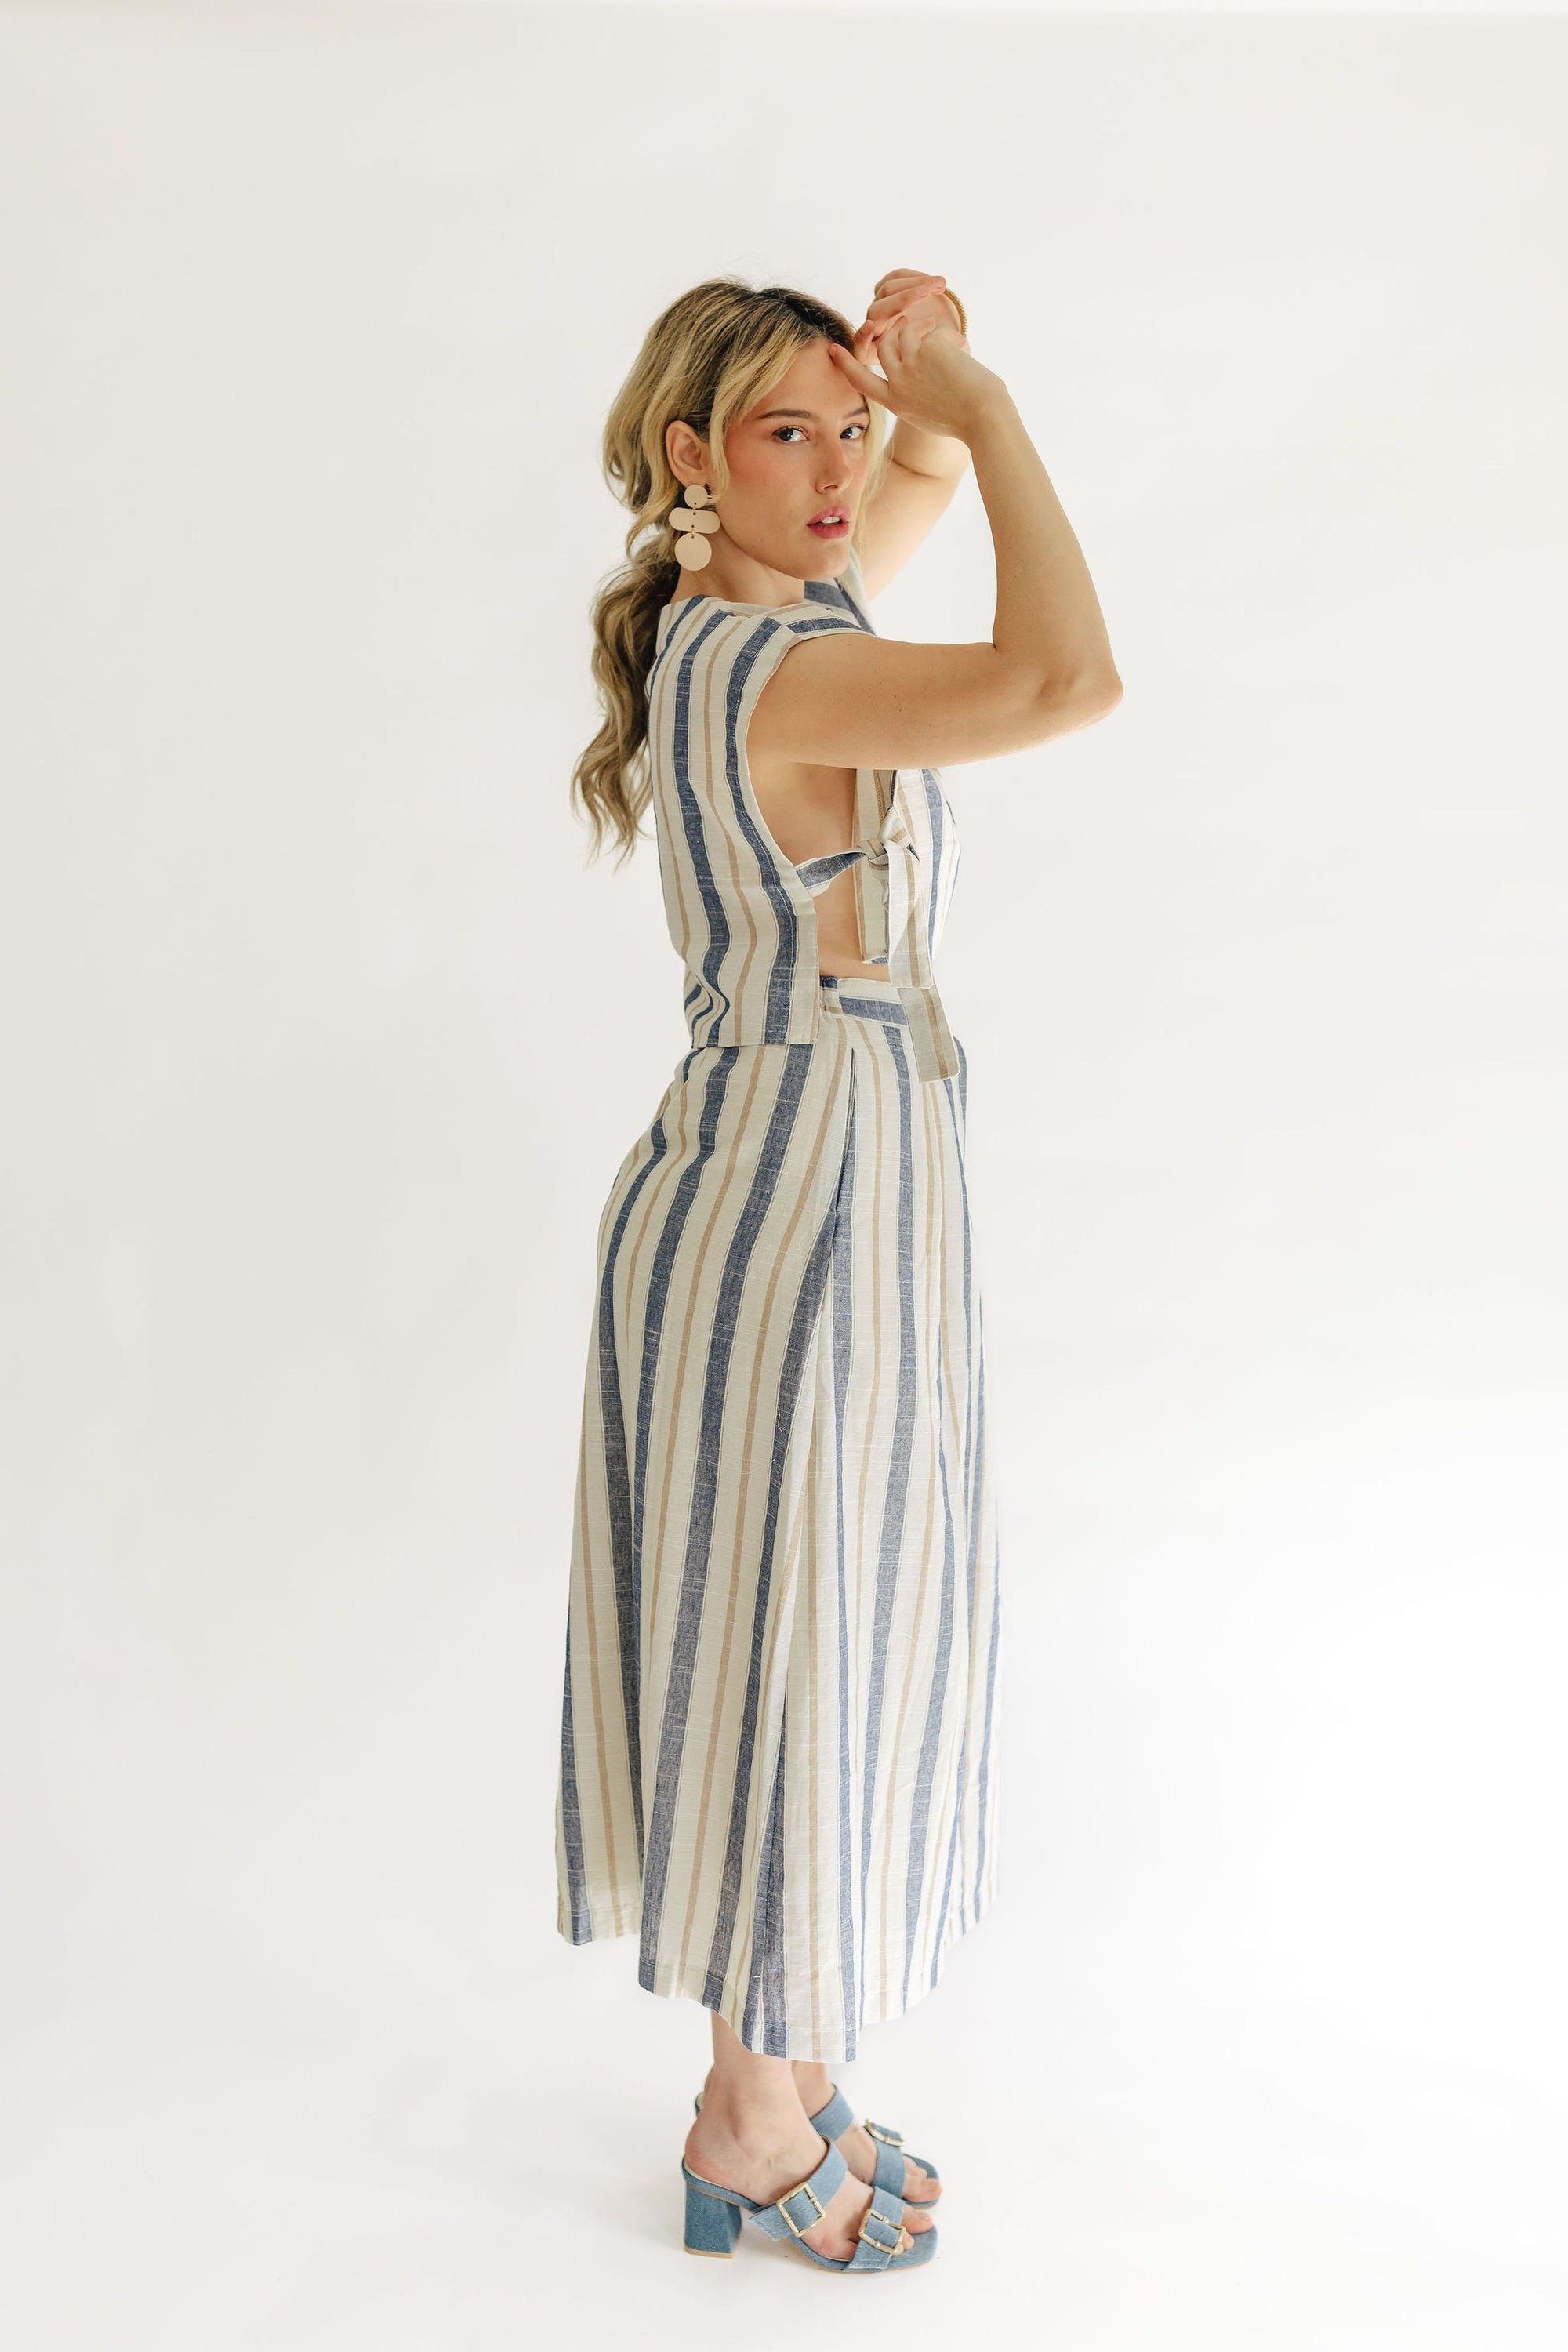 The Cammy Stripe Top + Skirt Set - Sold Separately